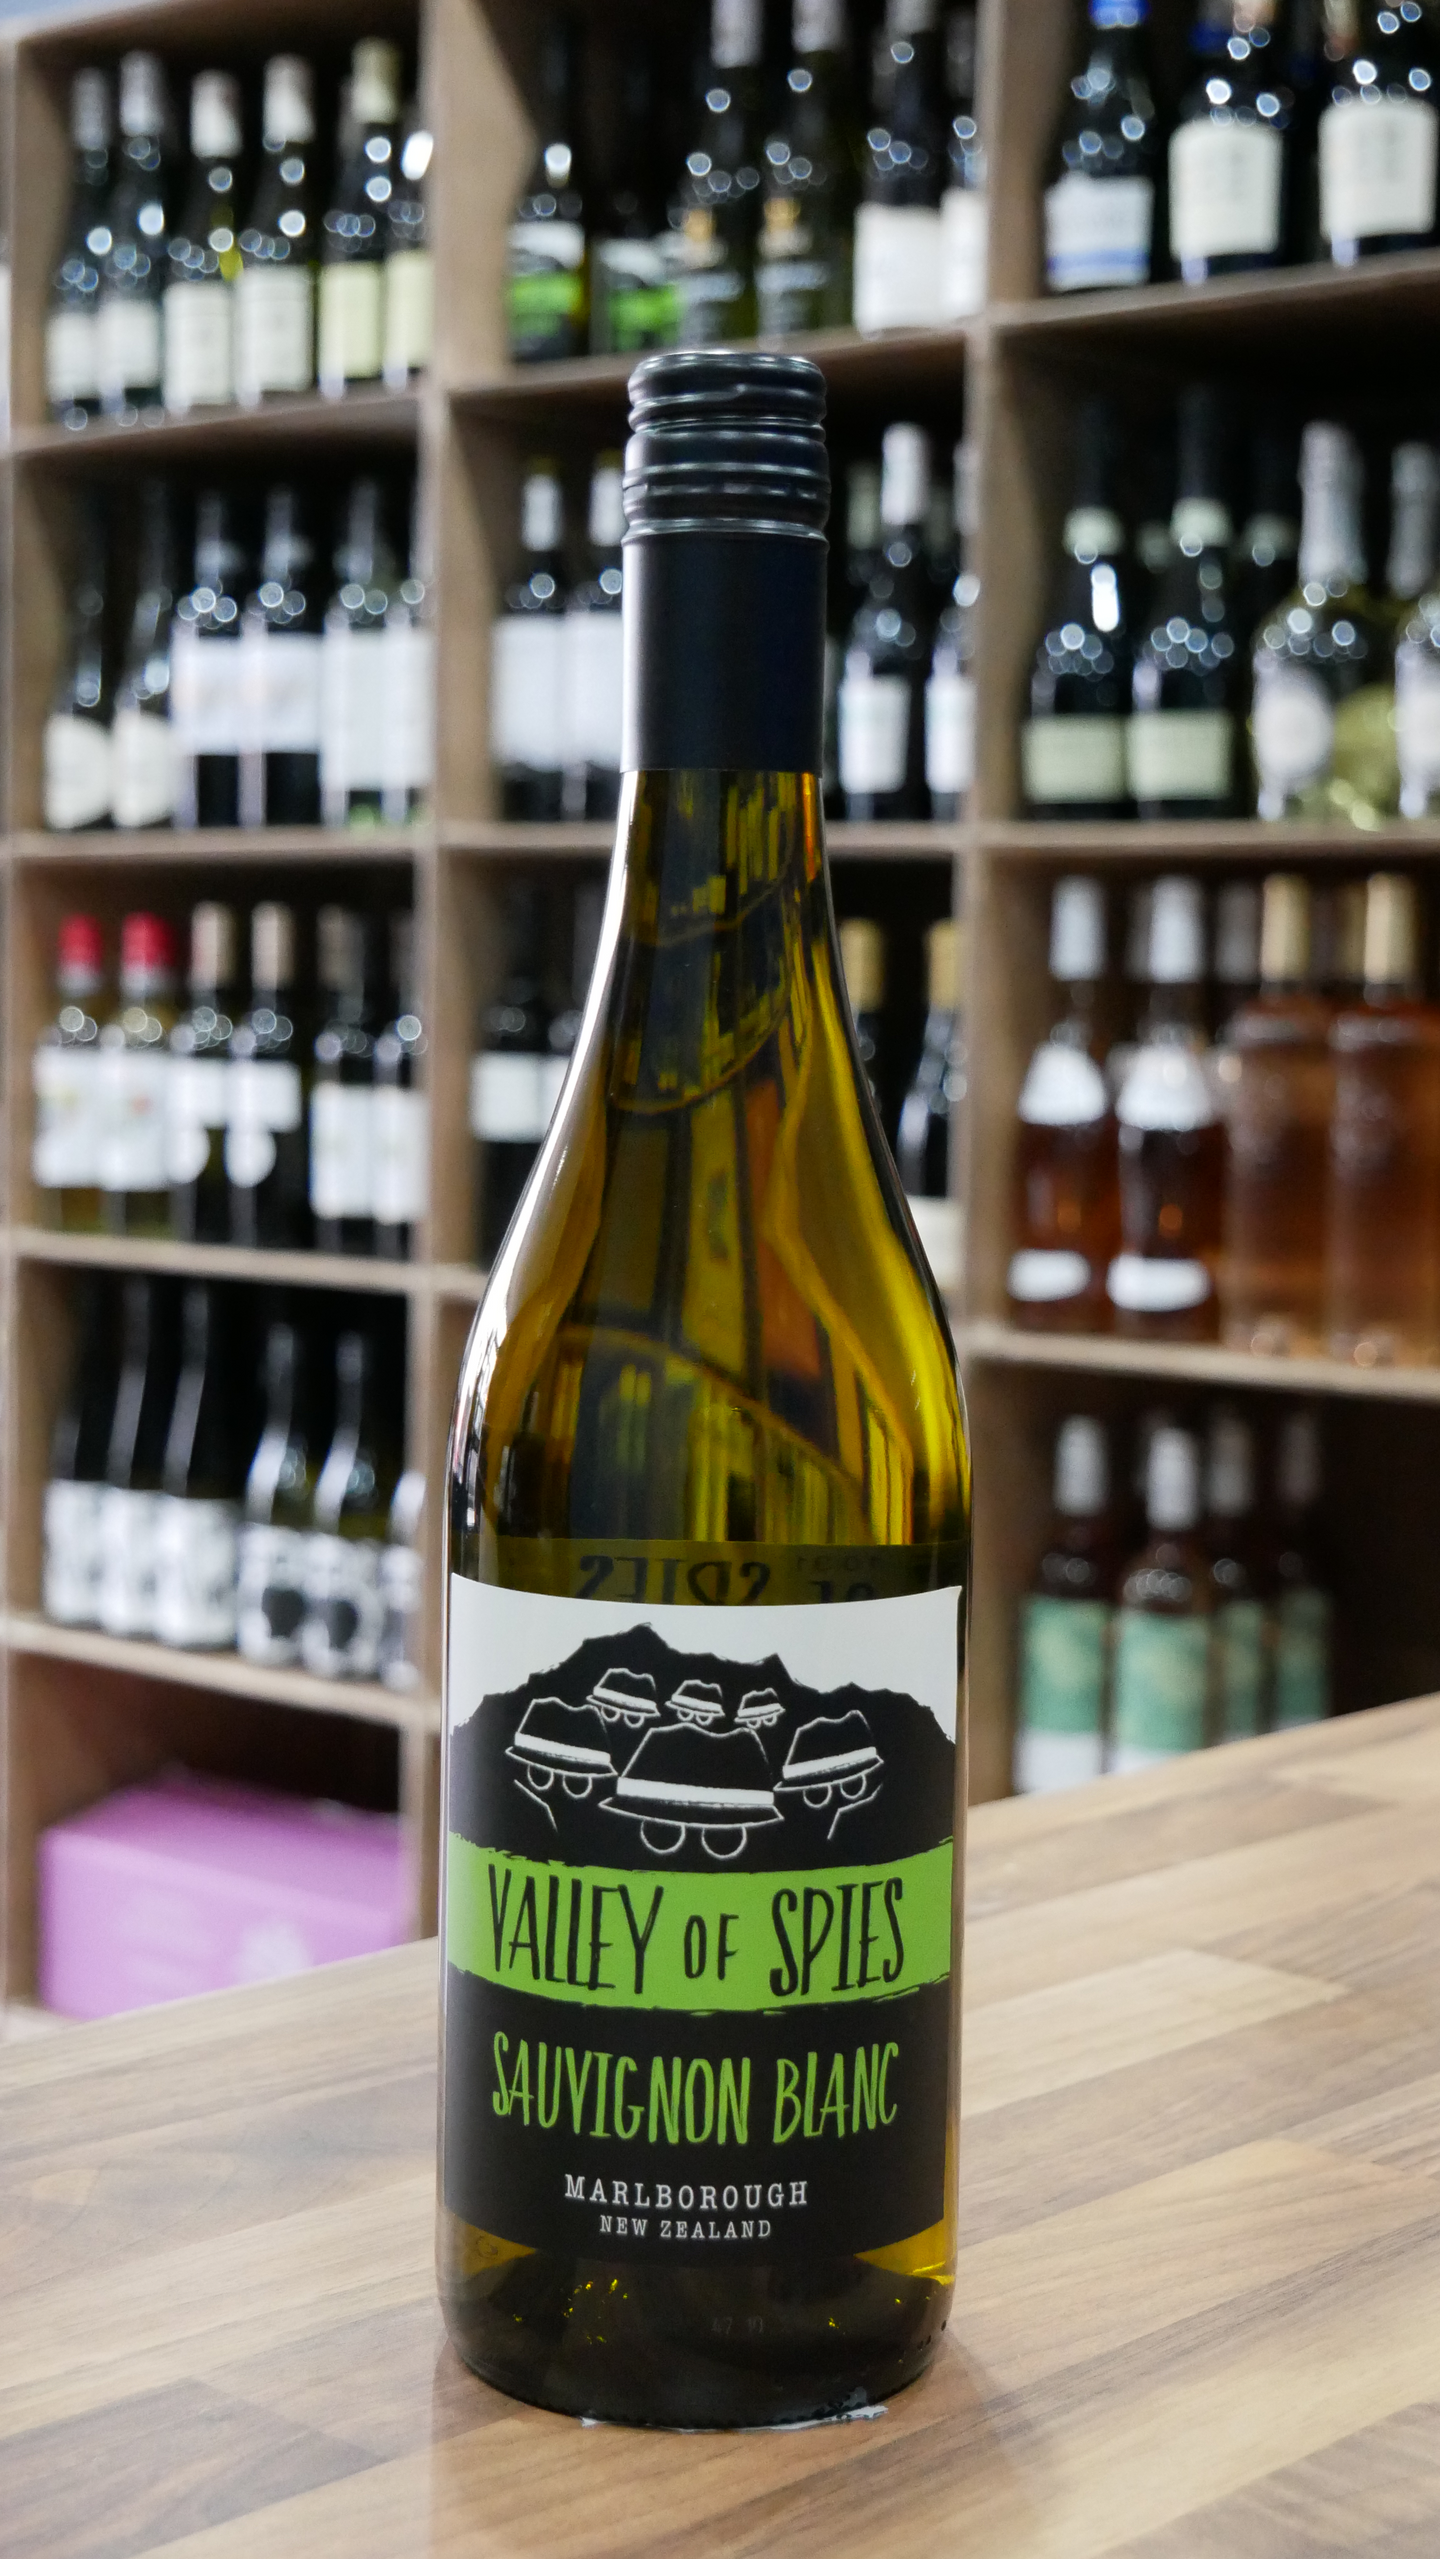 Valley of Spies Sauvignon Blanc 2020 75cl